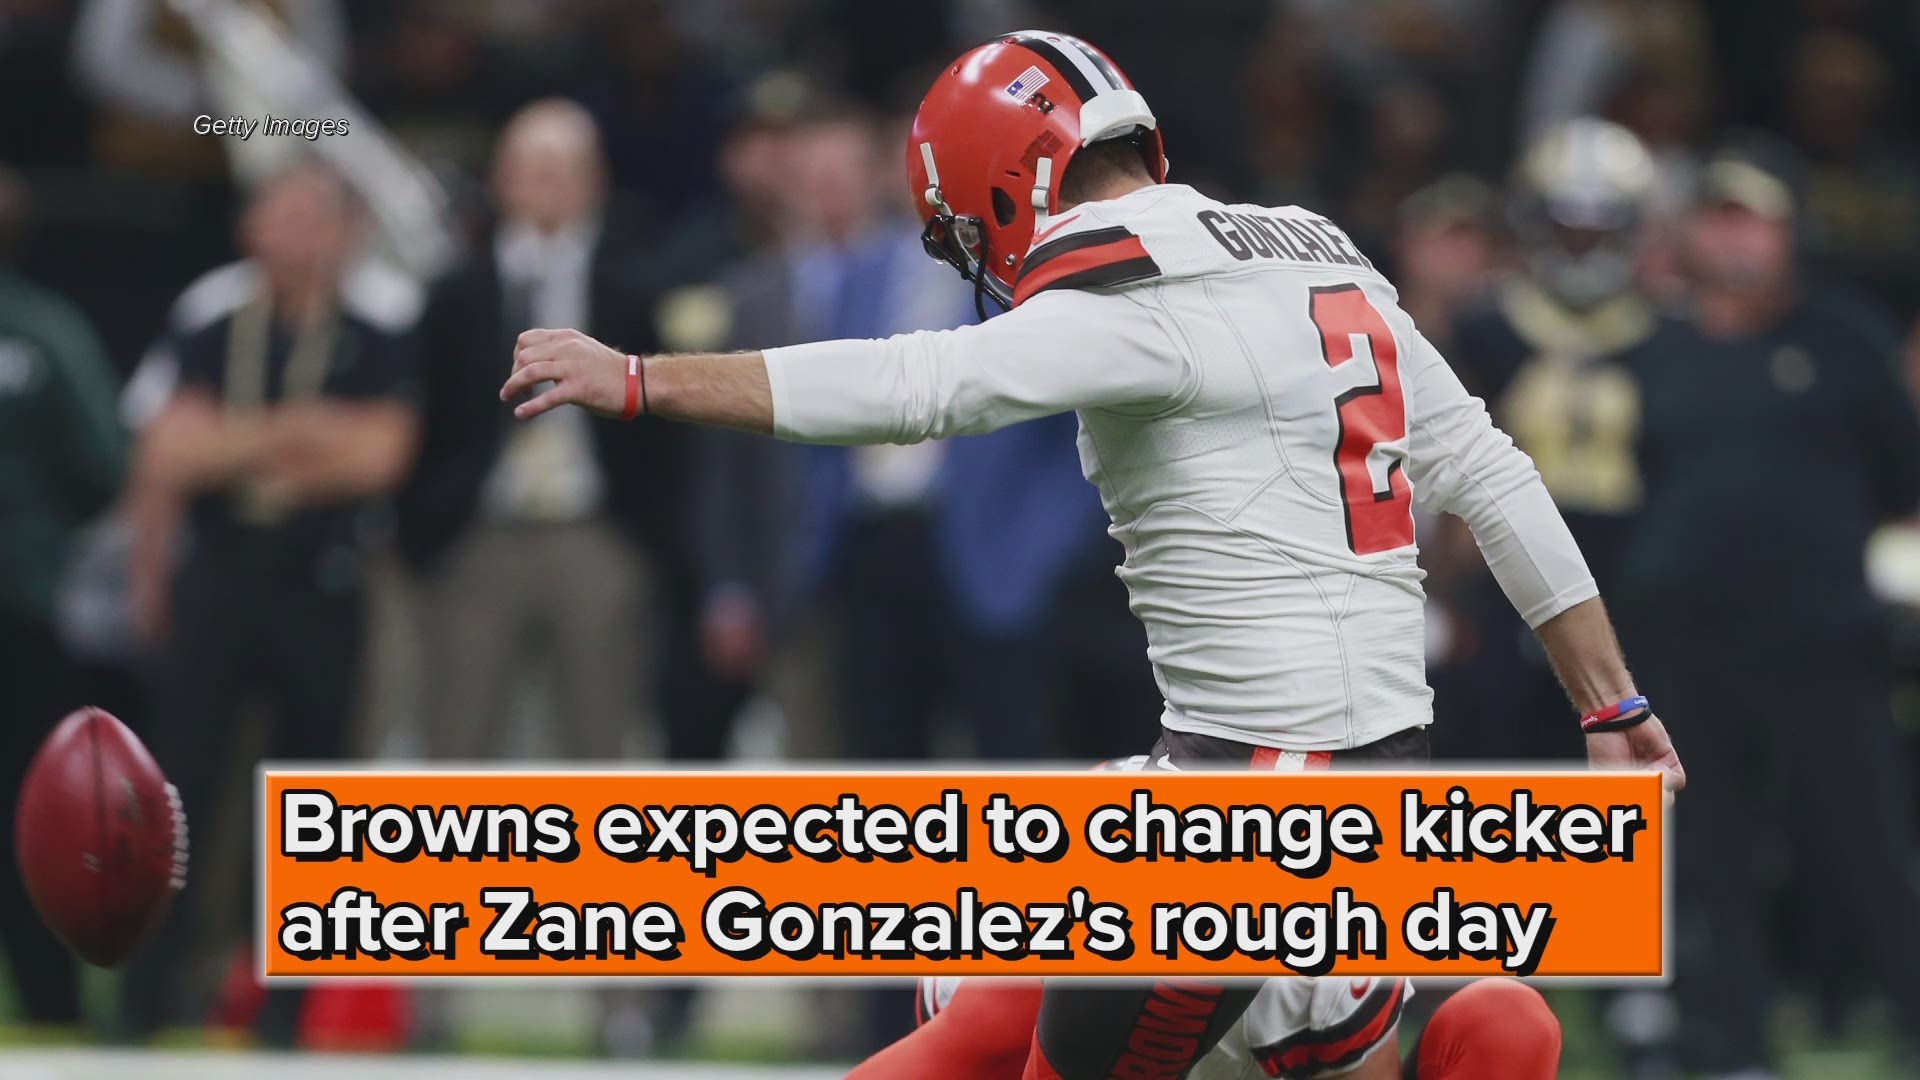 Reports: Cleveland Browns trying out new kickers following Zane Gonzalez's struggles Sunday